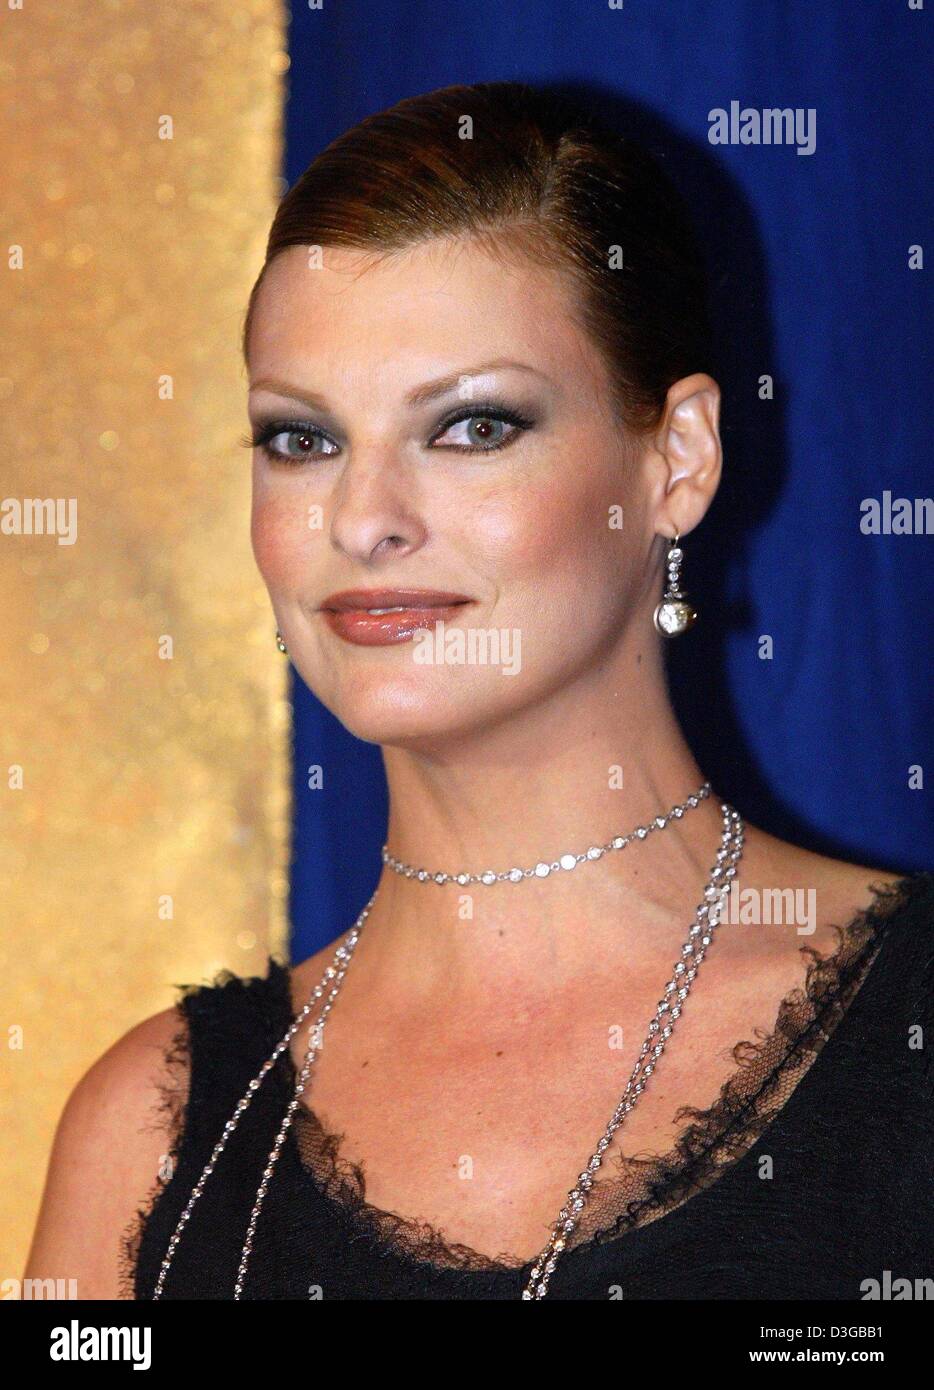 (dpa) - Canadian supermodel Linda Evangelista pictured during the International UNESCO Benefit Gala for Children in Need in Neuss, Germany, 6 November 2004. Stock Photo